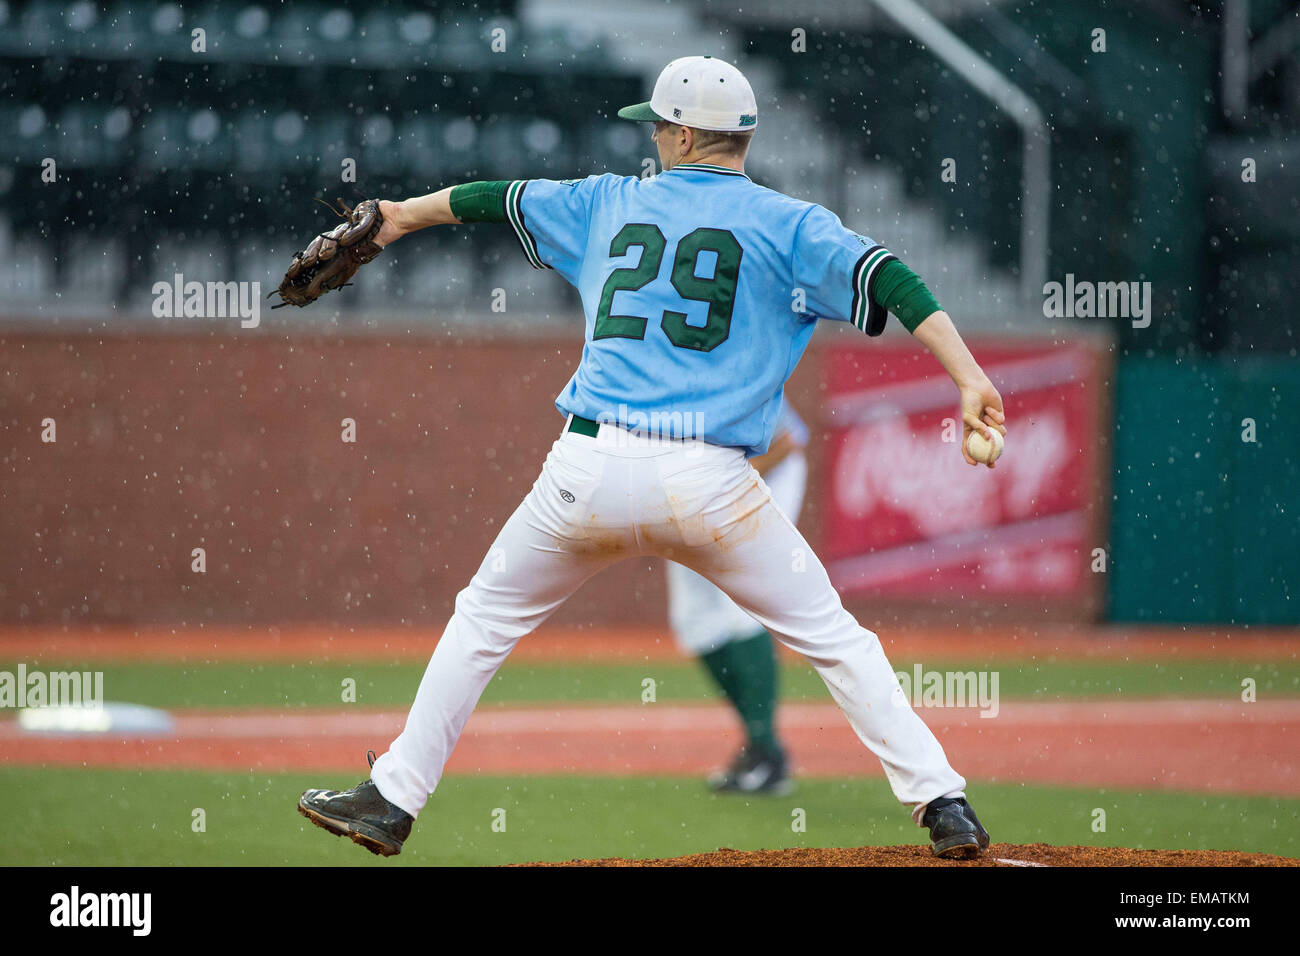 New Orleans, LA, USA. 18th Apr, 2015. Tulane pitcher Emerson Gibbs (29) during the game between Tulane and UCF at Greer Field at Turchin Stadium in New Orleans, LA. UCF defeats Tulane 8-0 © csm/Alamy Live News Stock Photo